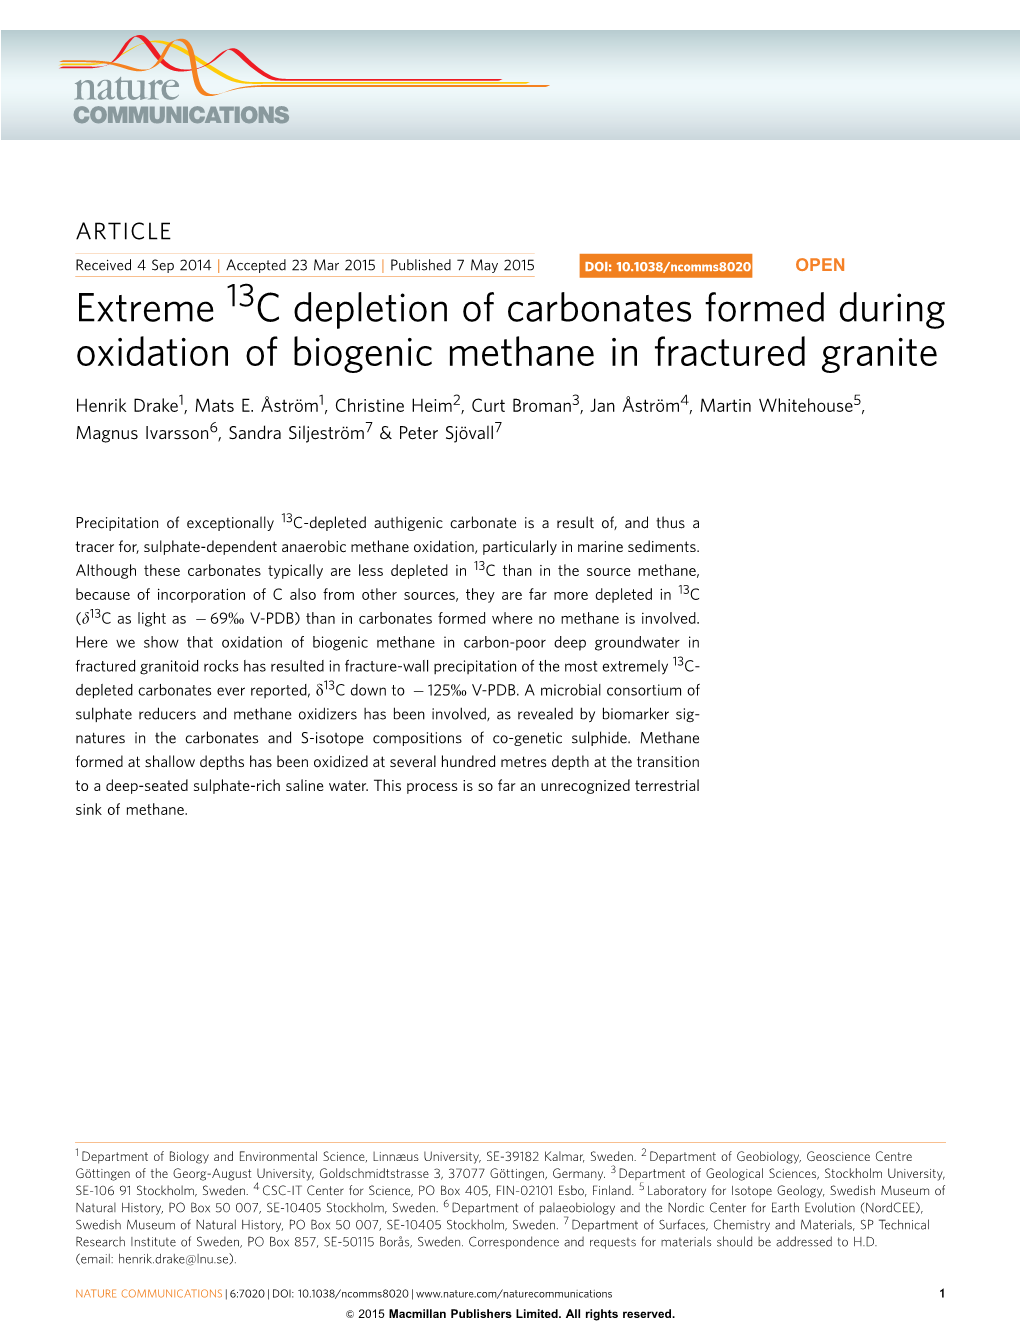 Extreme 13C Depletion of Carbonates Formed During Oxidation of Biogenic Methane in Fractured Granite